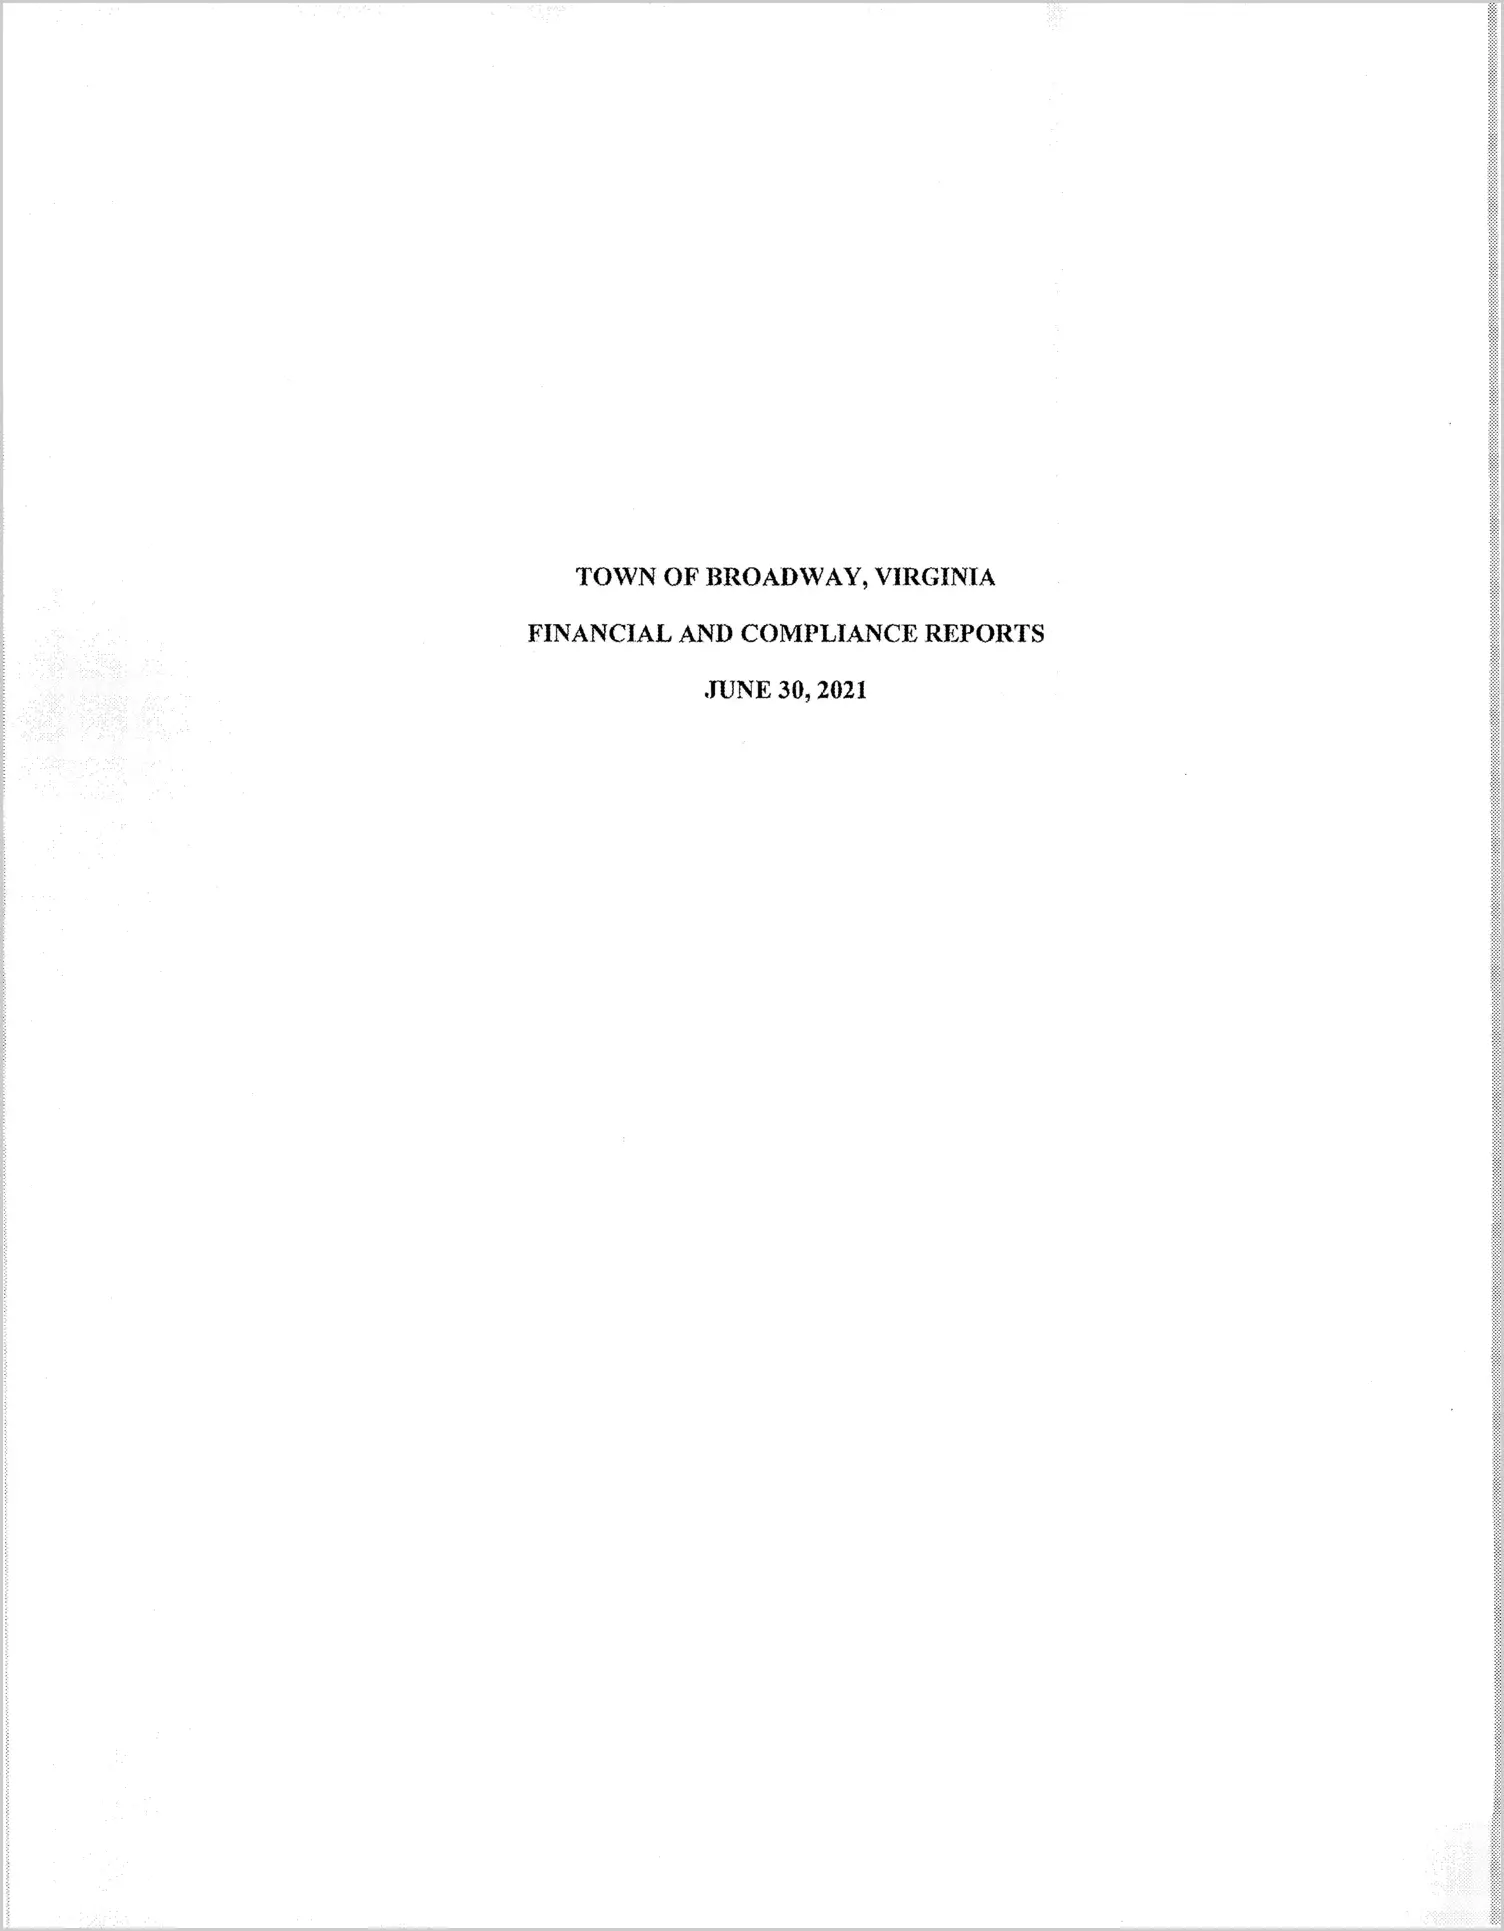 2021 Annual Financial Report for Town of Broadway